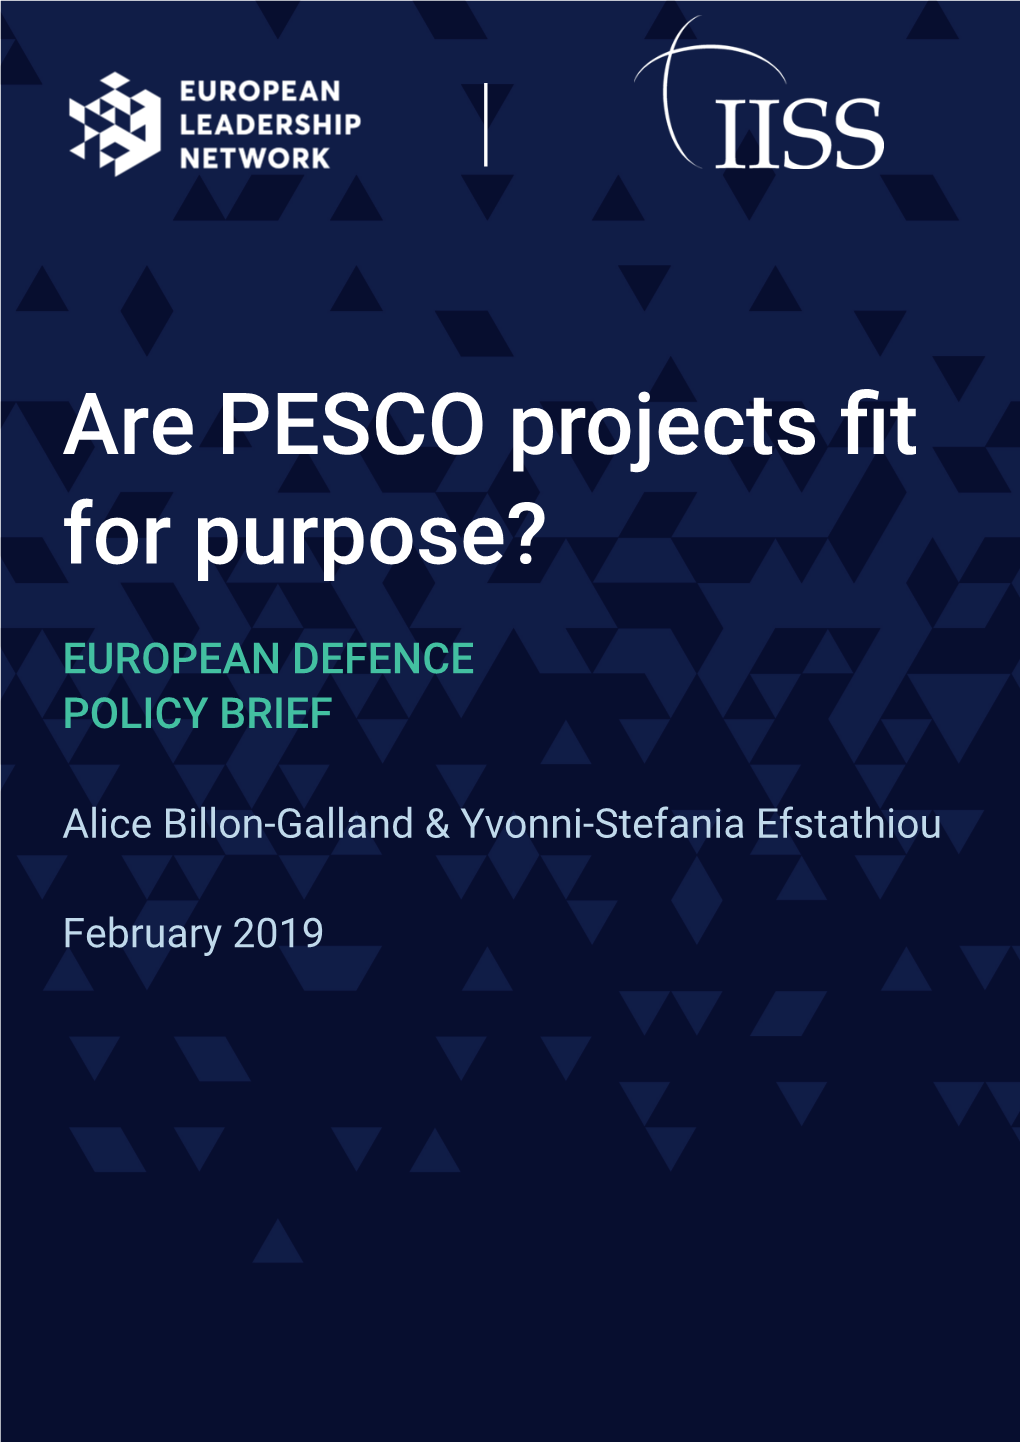 Are PESCO Projects Fit for Purpose?